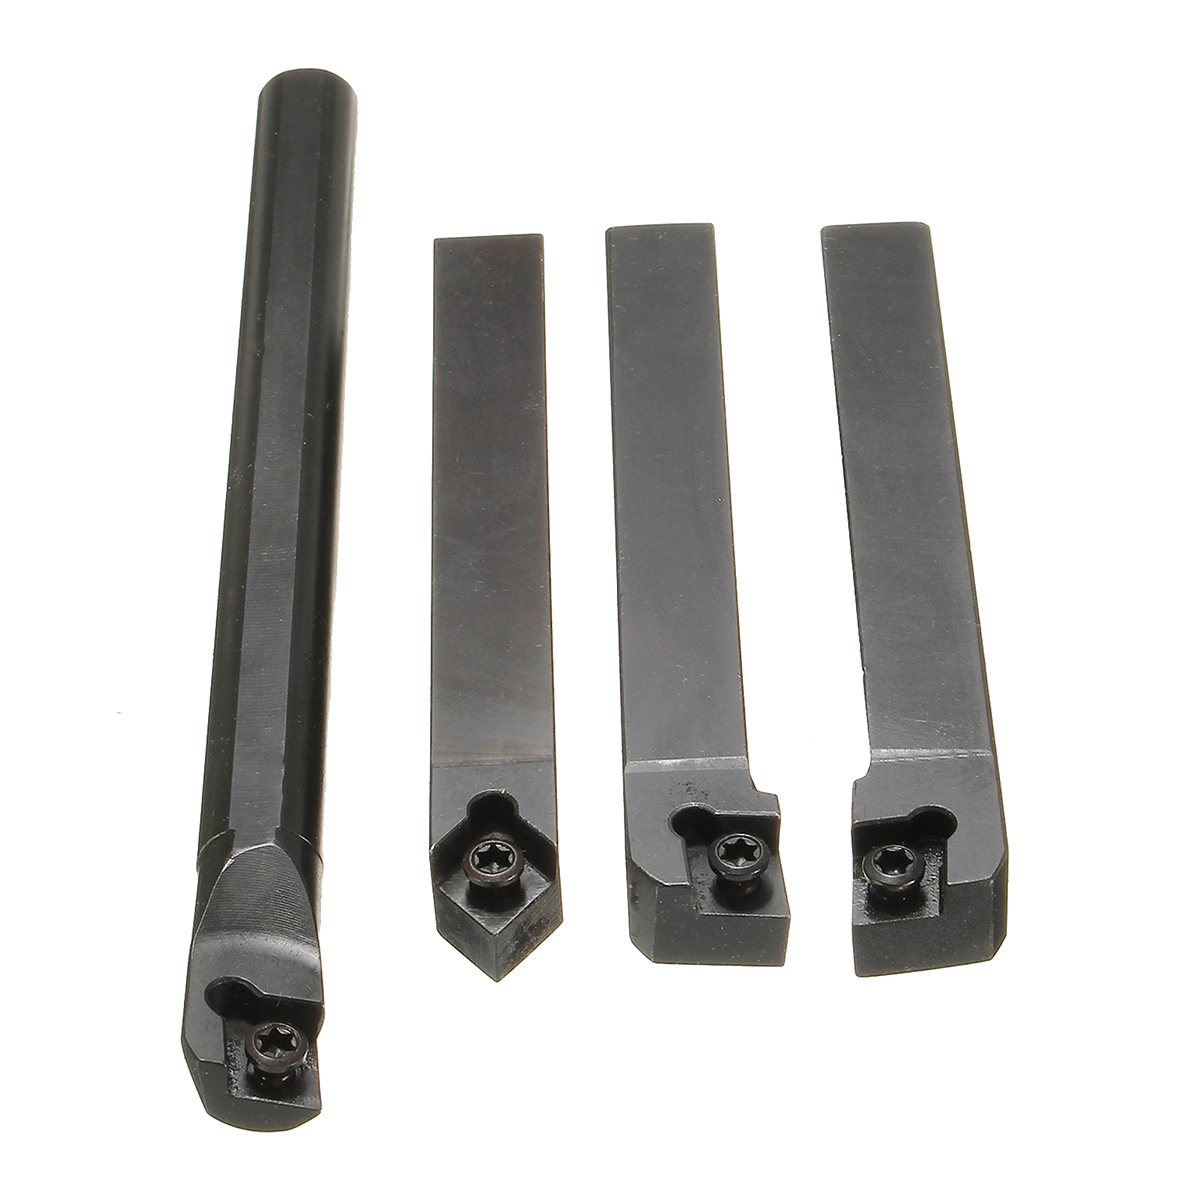 4pcs-SCLCRL-SCMCN-12mm-Lathe-Boring-Bar-Turning-Tool-Holder-With-10pcs-CCMT09T304-Carbide-Inserts-1088746-5